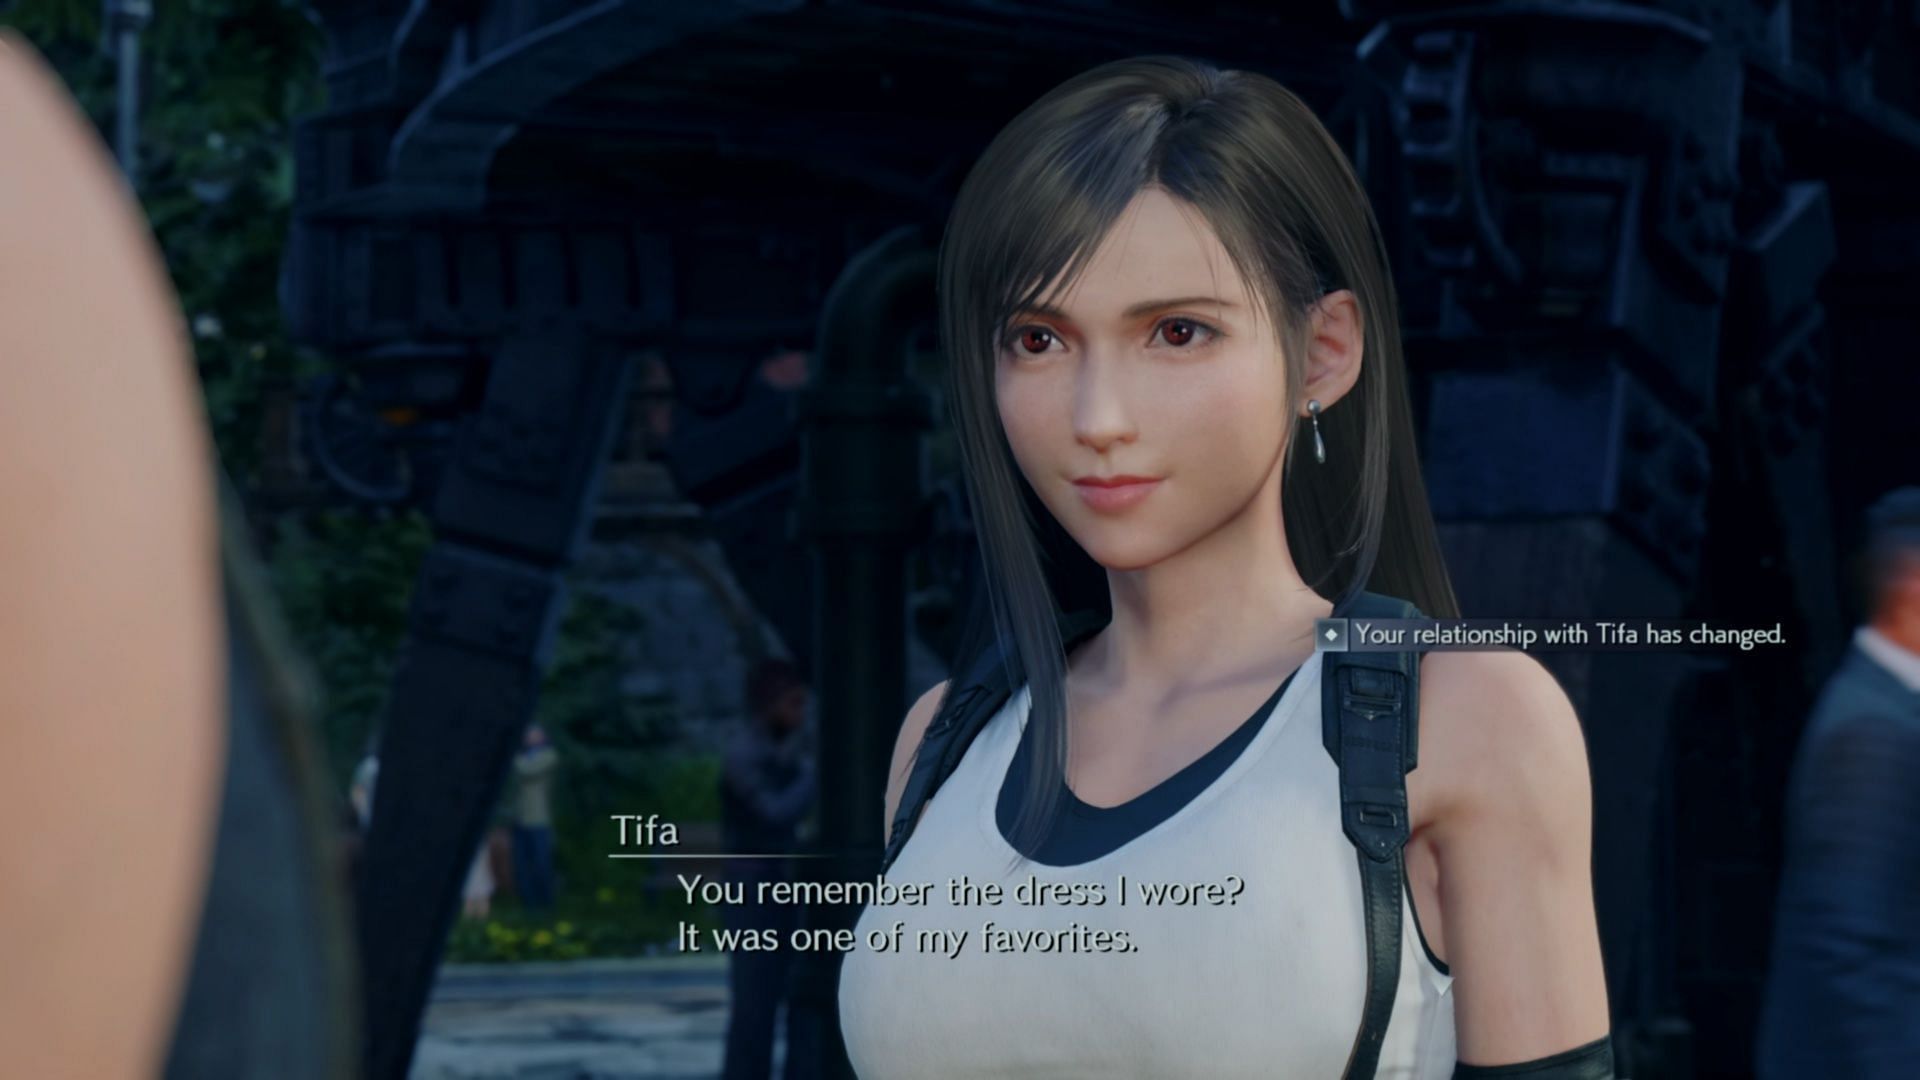 Take care about how you respond to your friends (Image via Square Enix)